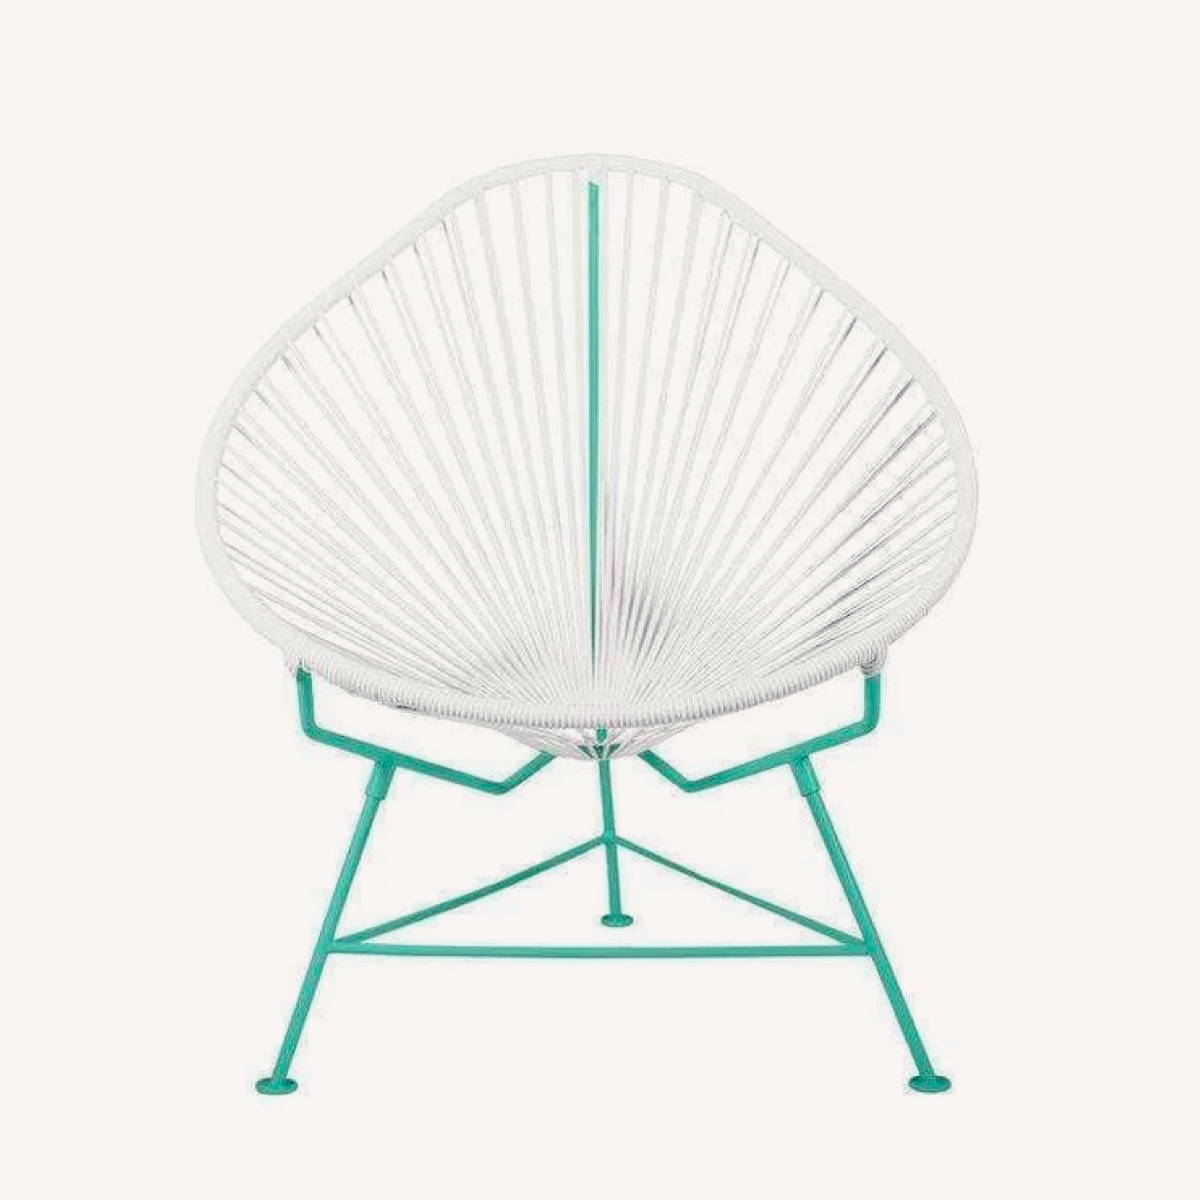 Boxhill's Pastel Acapulco Chair